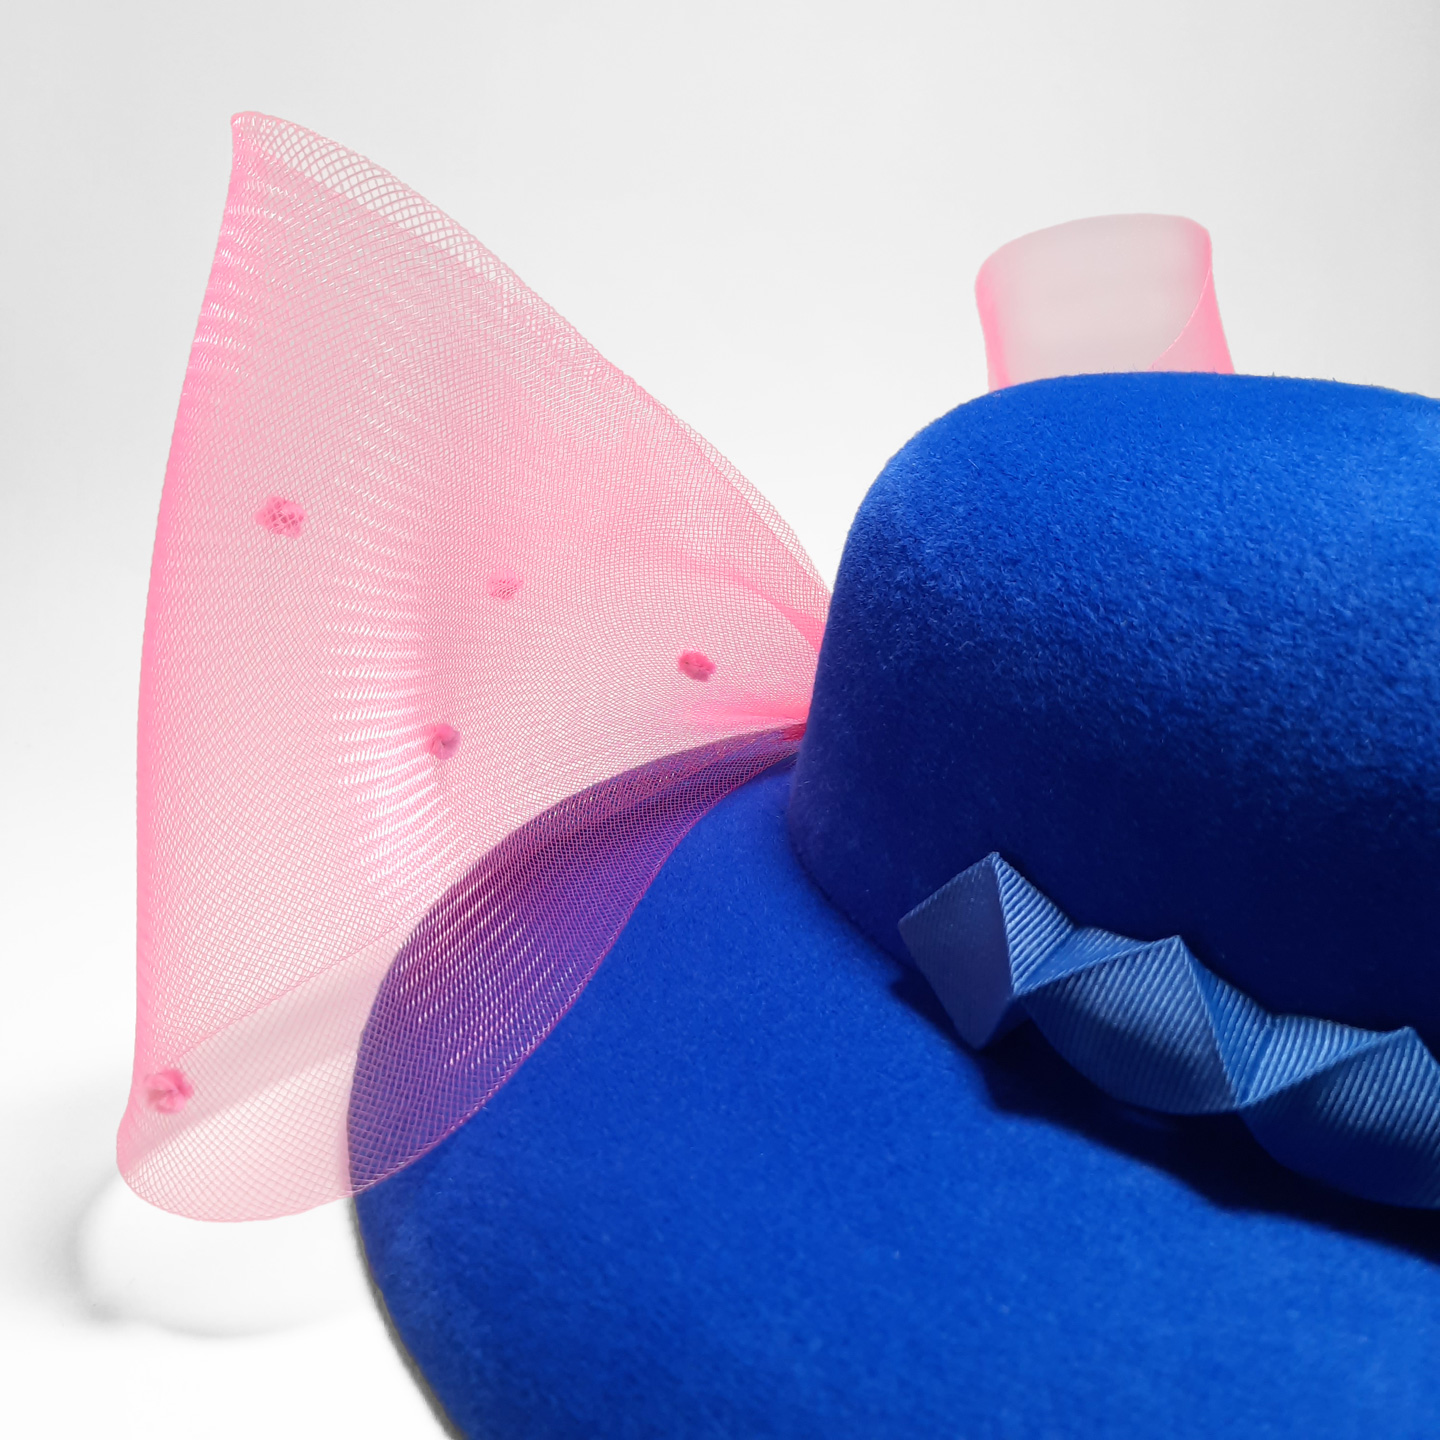 A luxury hat in a beautiful shade of cobalt blue. It's decorated with 3D chameleon detail and a detachable large pink bow.